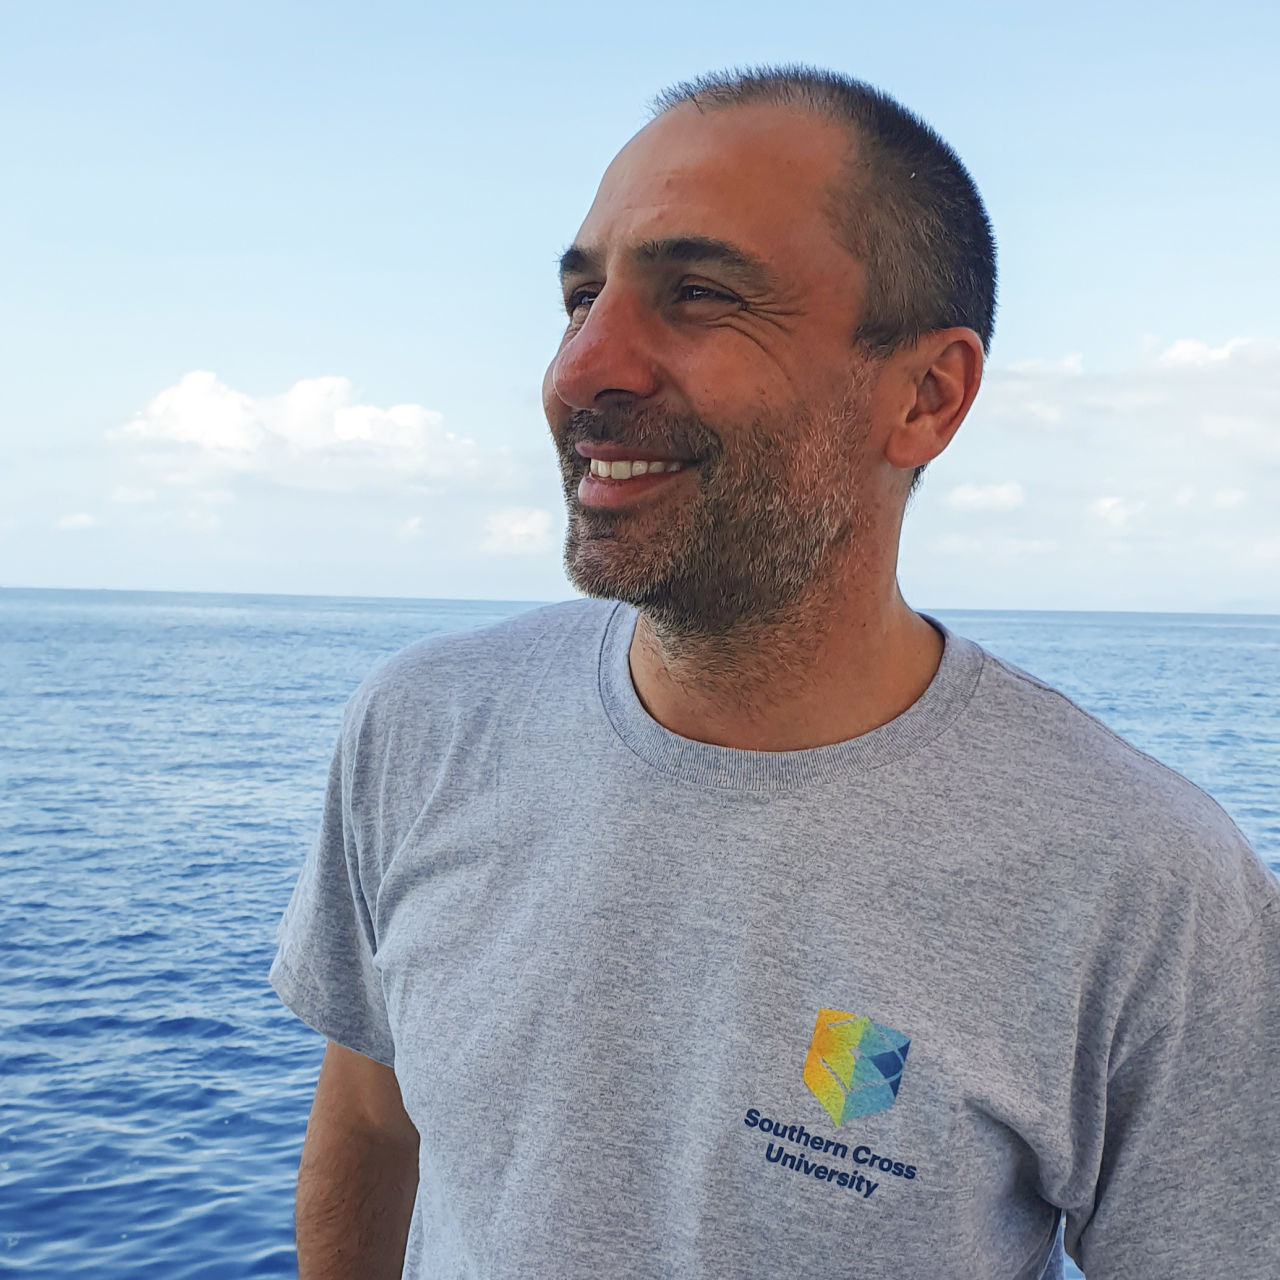 Daniele hopes the Dolphin project will help shed light on snub nose dolphins.